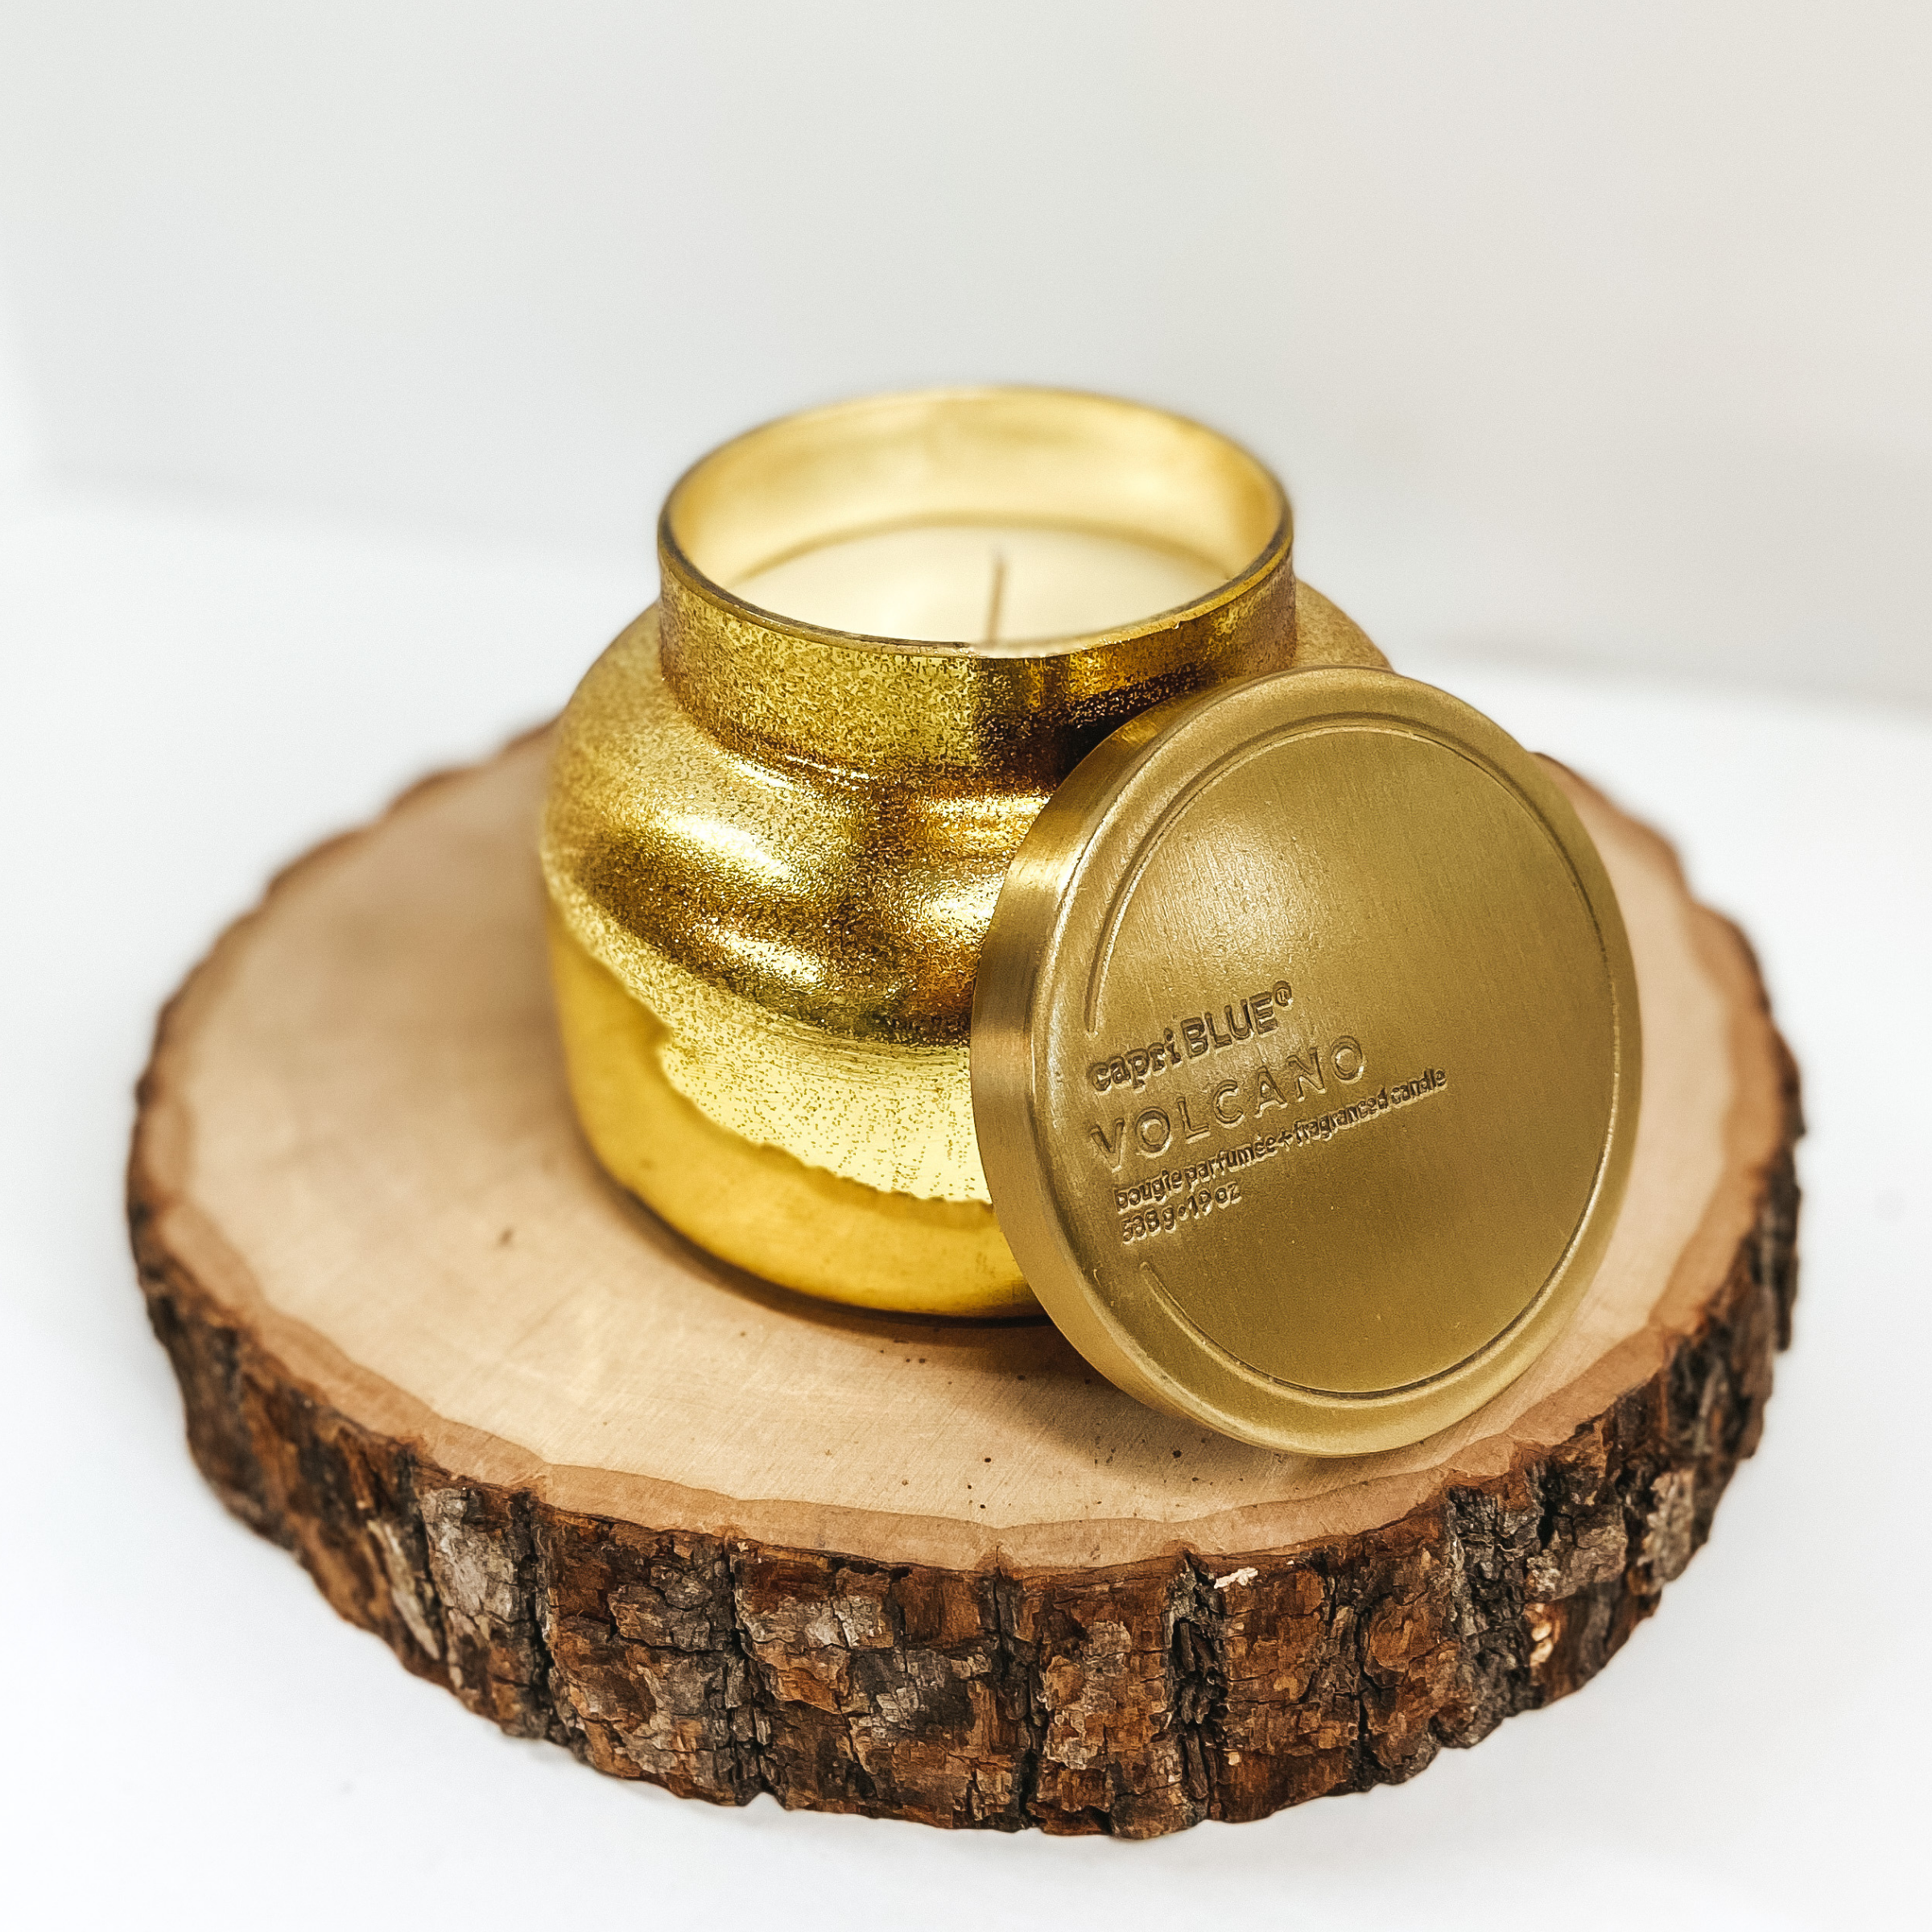 Gold glitter jar candle pictured on wooden stump against a white background.